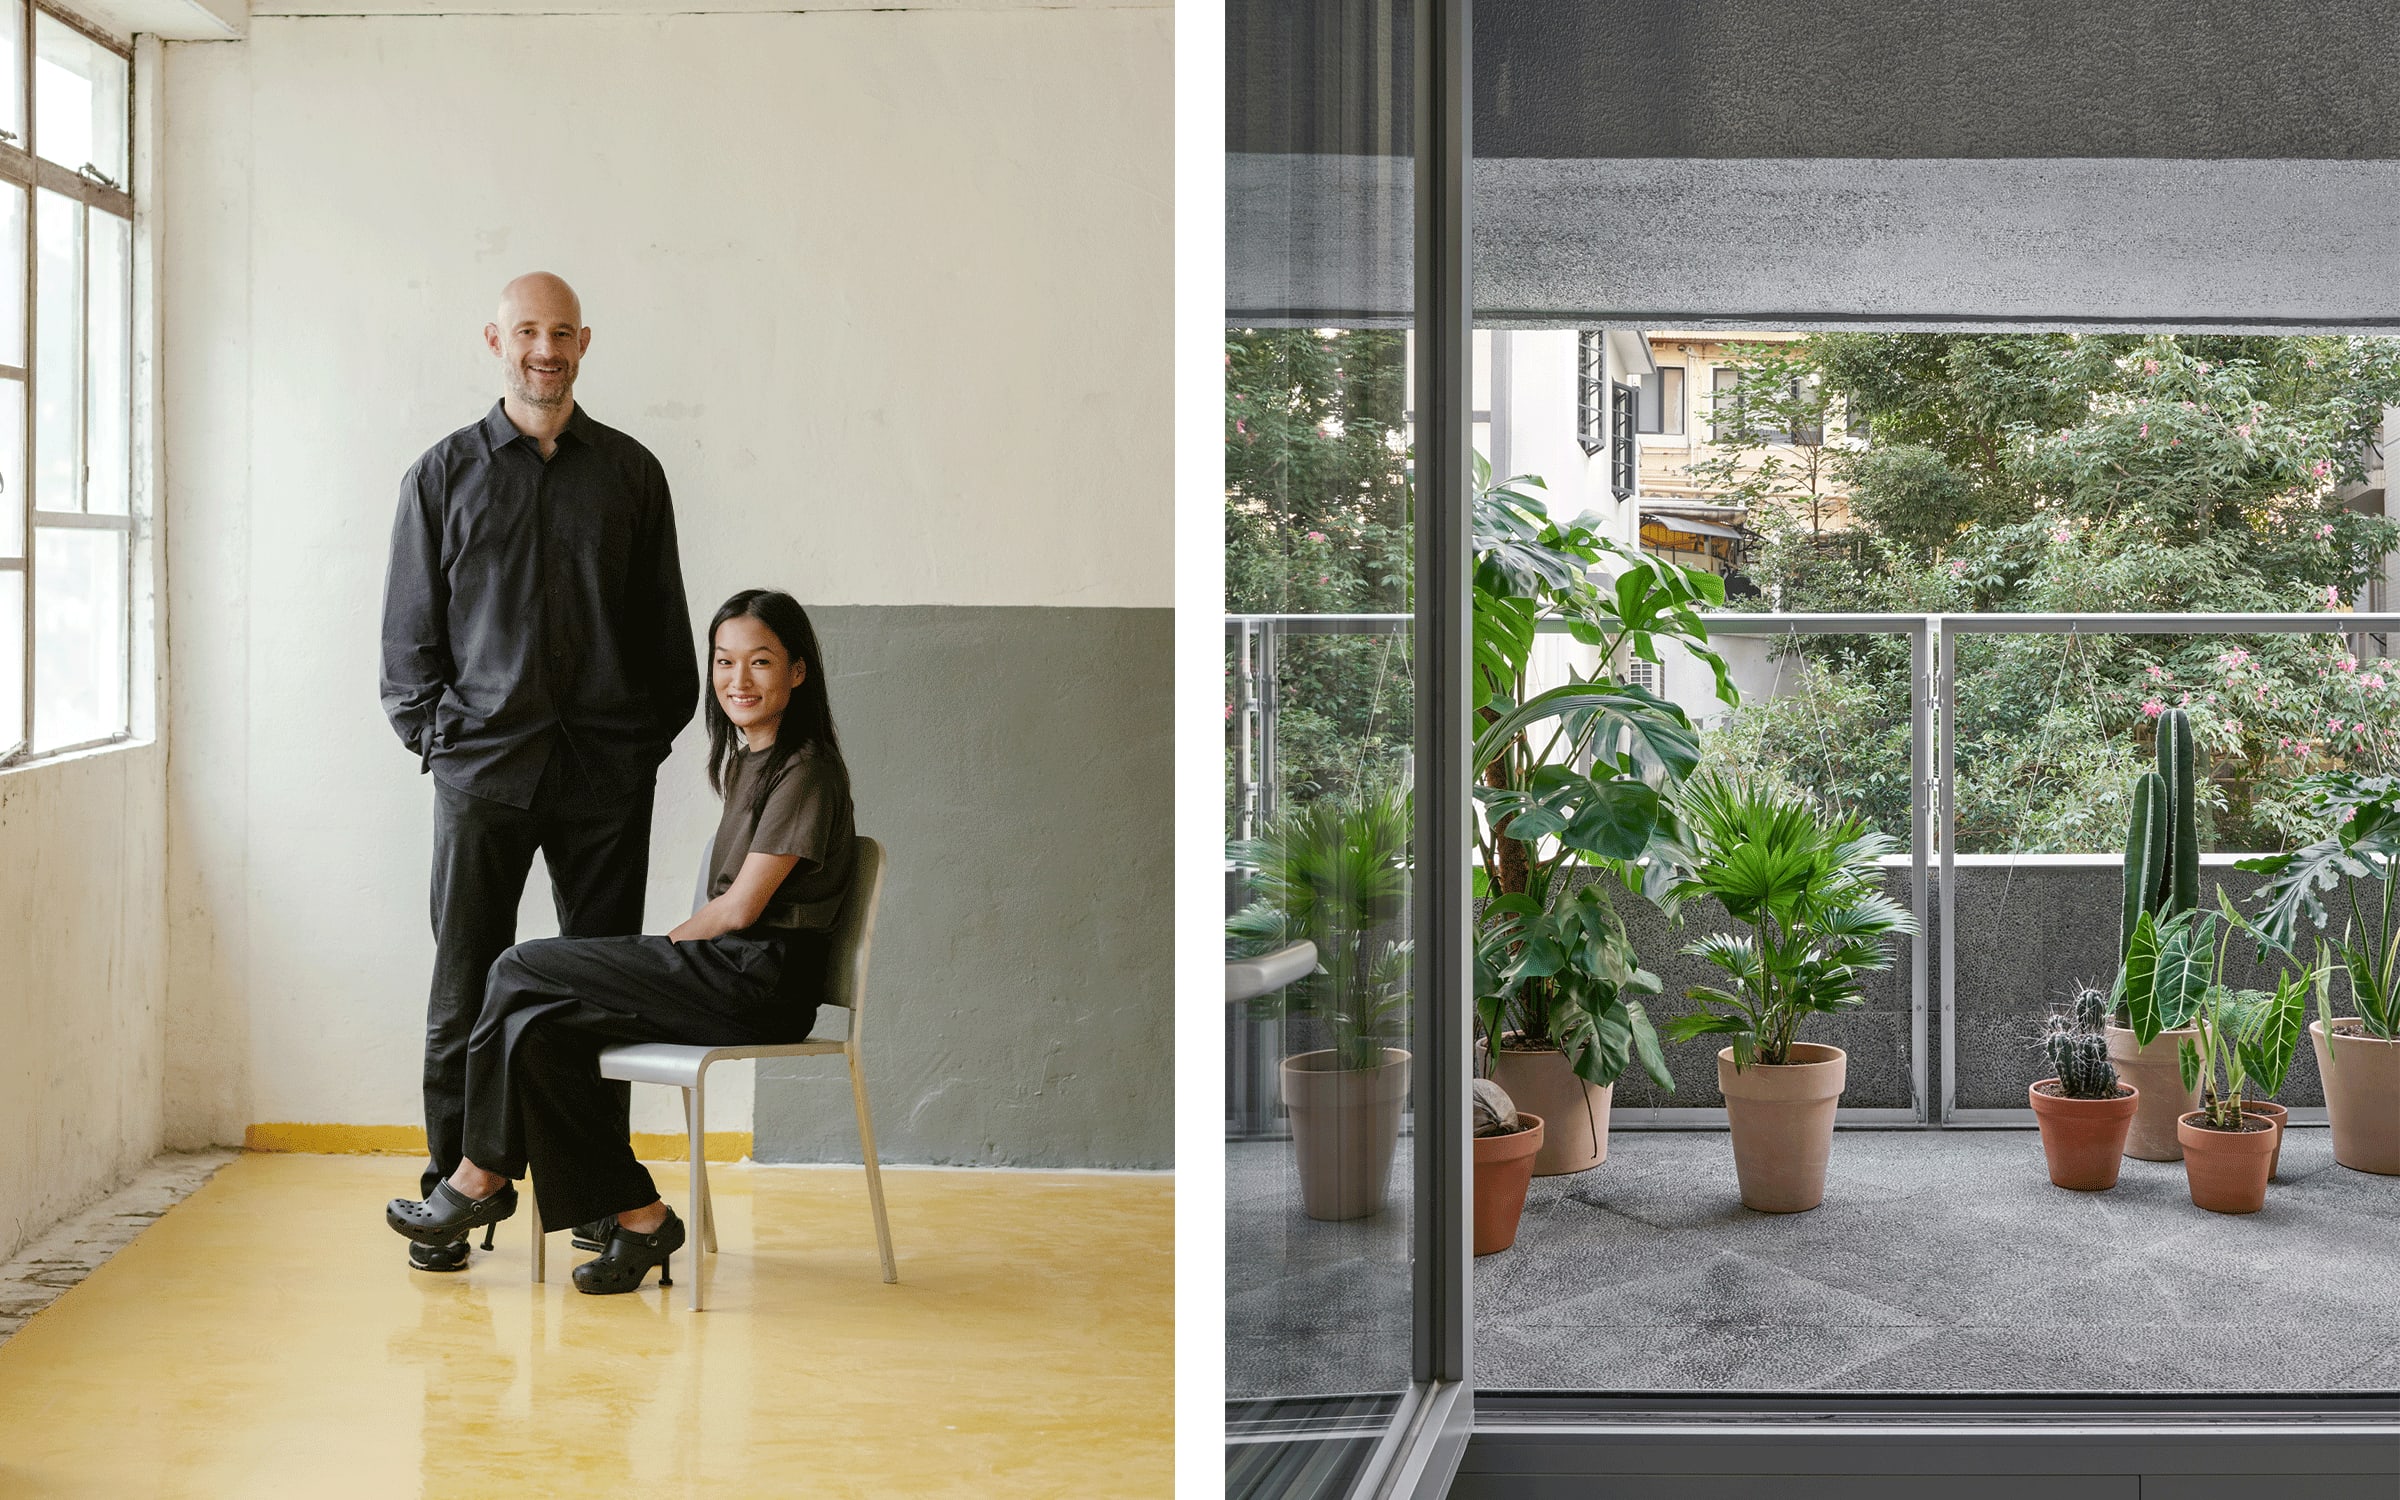 Left: Edouard Malingue and Lorraine Kiang. Photograph by Nick Wong. Right: Kiang Malingue gallery in Wanchai, designed by BEAU. Courtesy of BEAU.